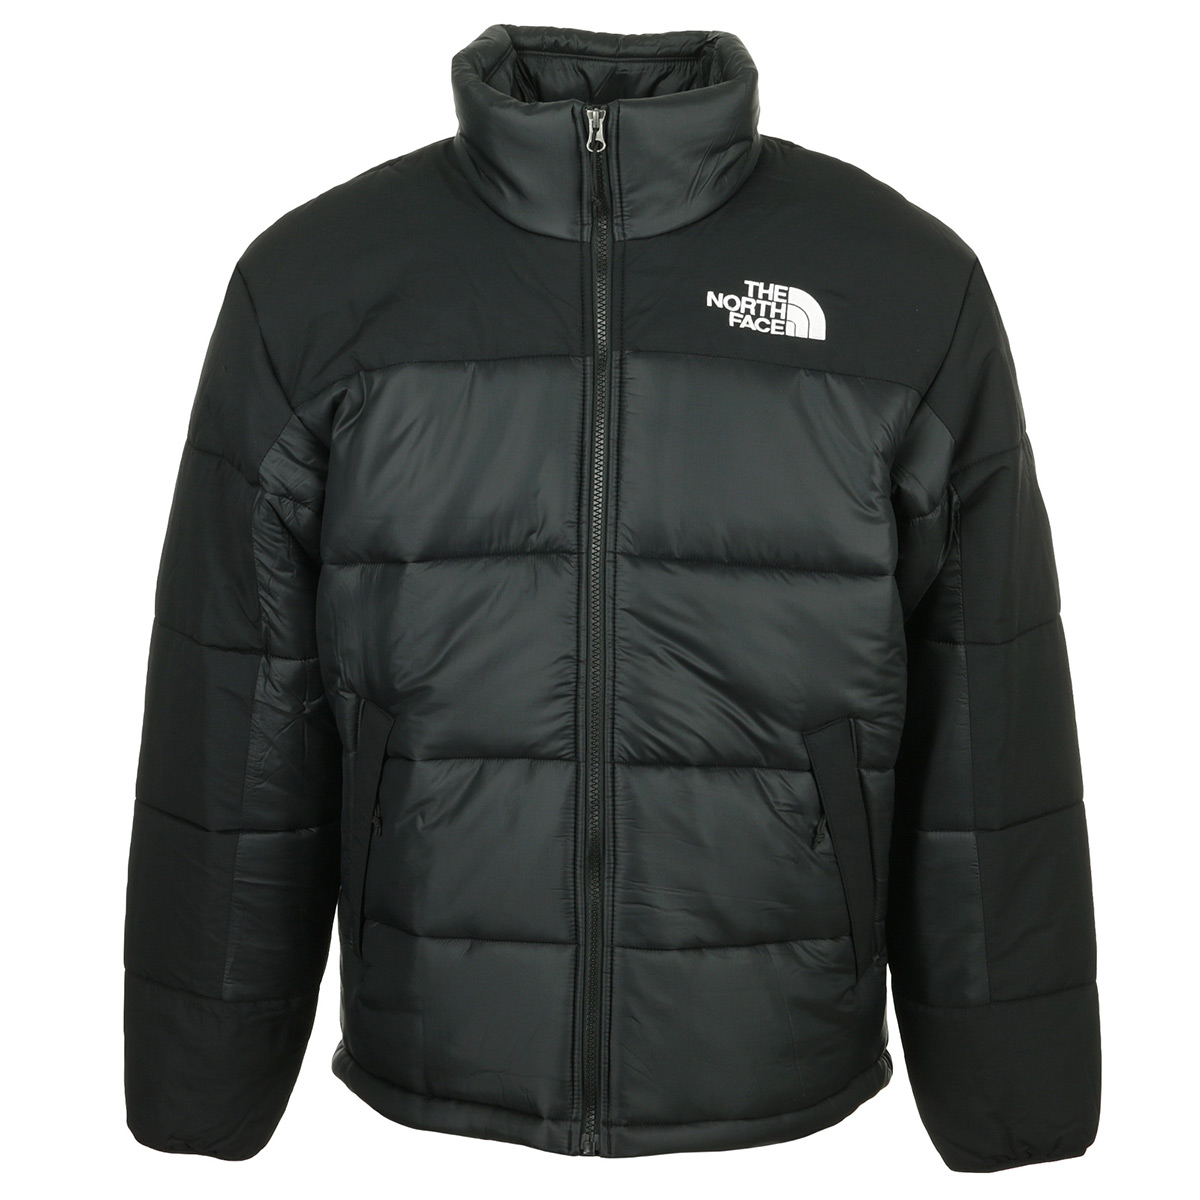 The North Face "Himalayan Insulated Jacket"